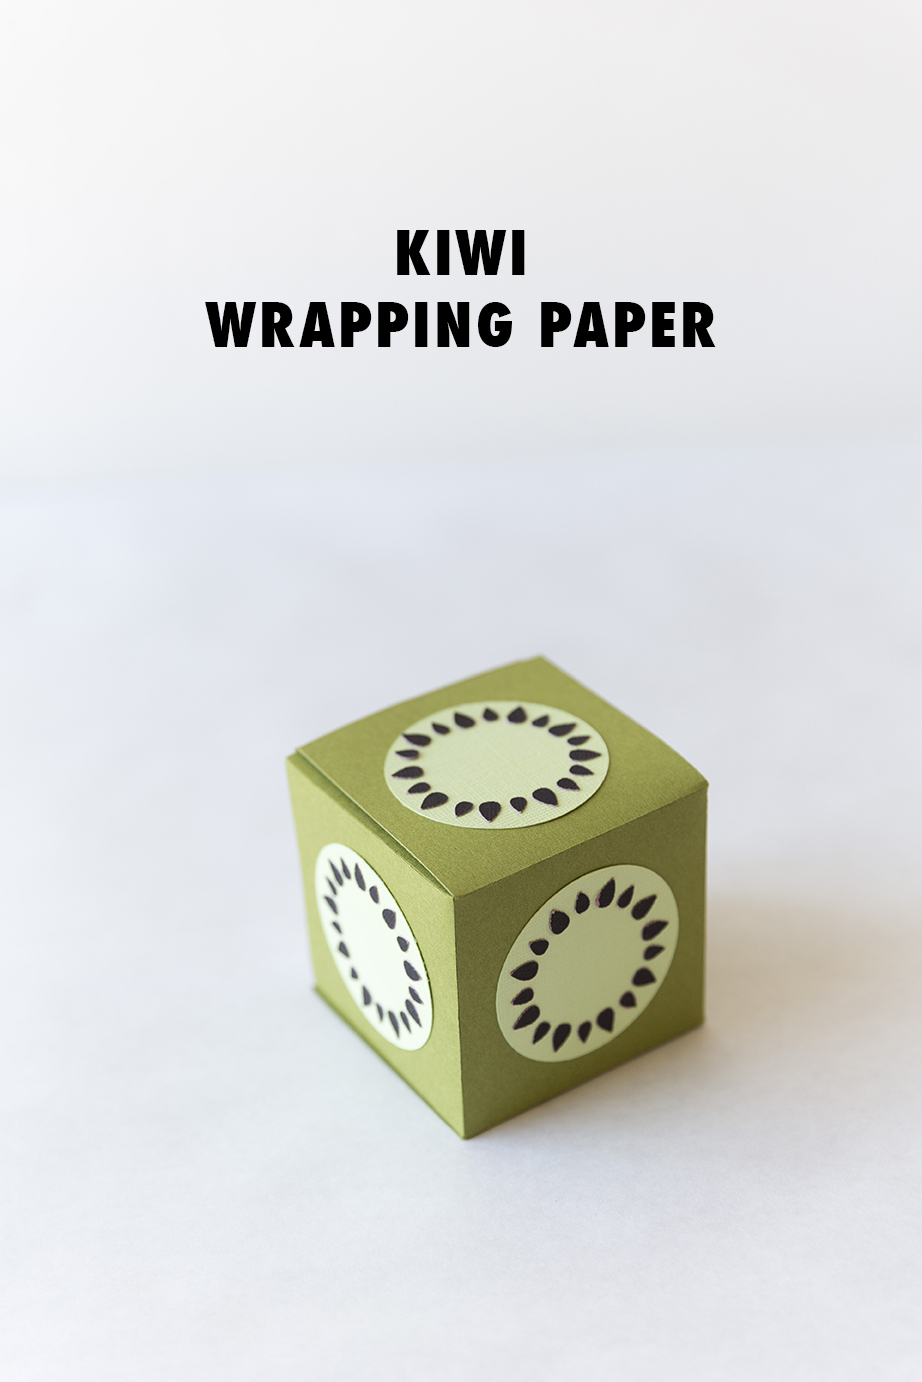 Turn your wrapping paper into a kiwi! 